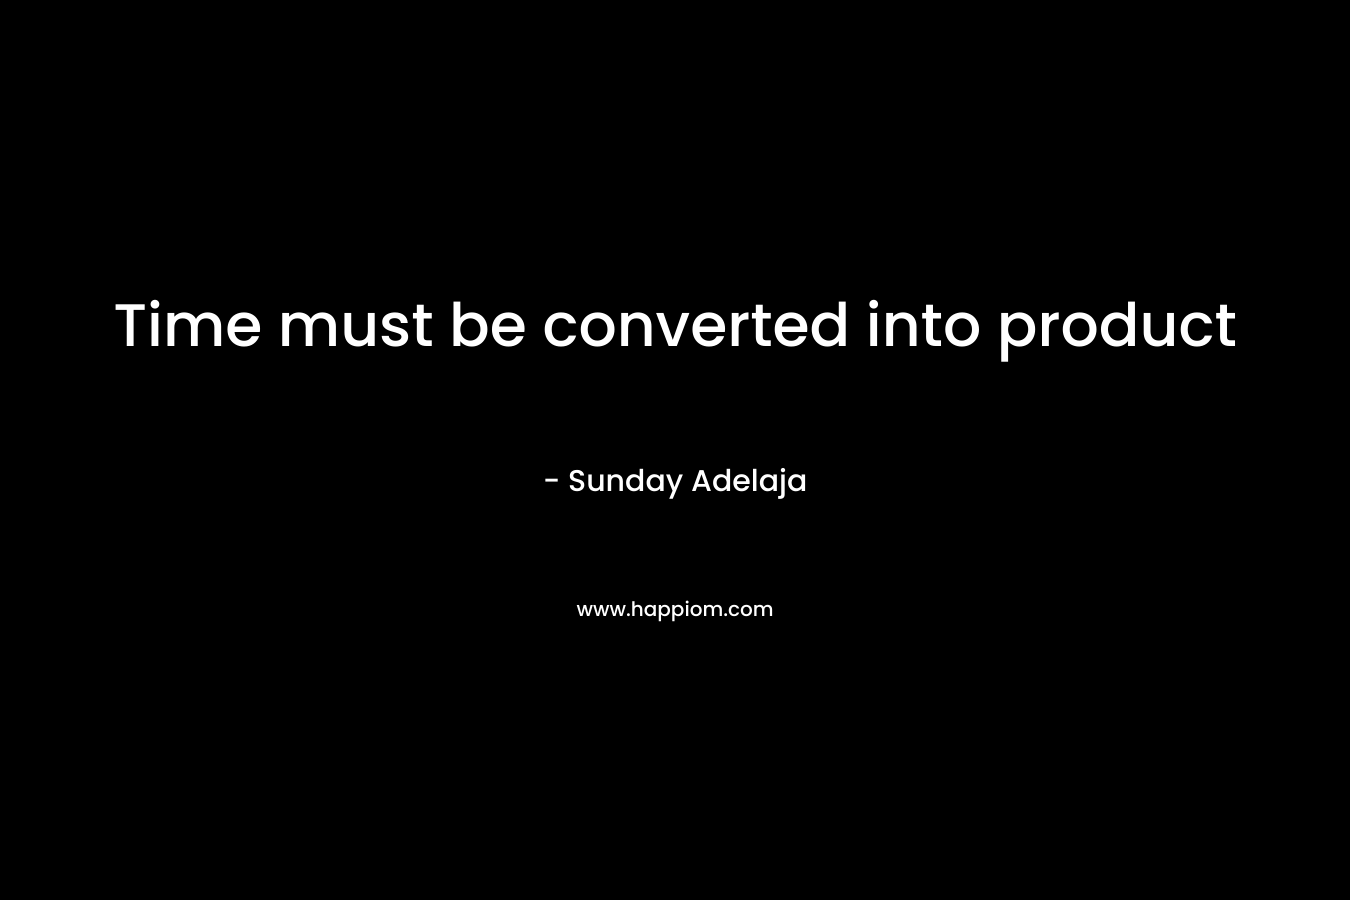 Time must be converted into product